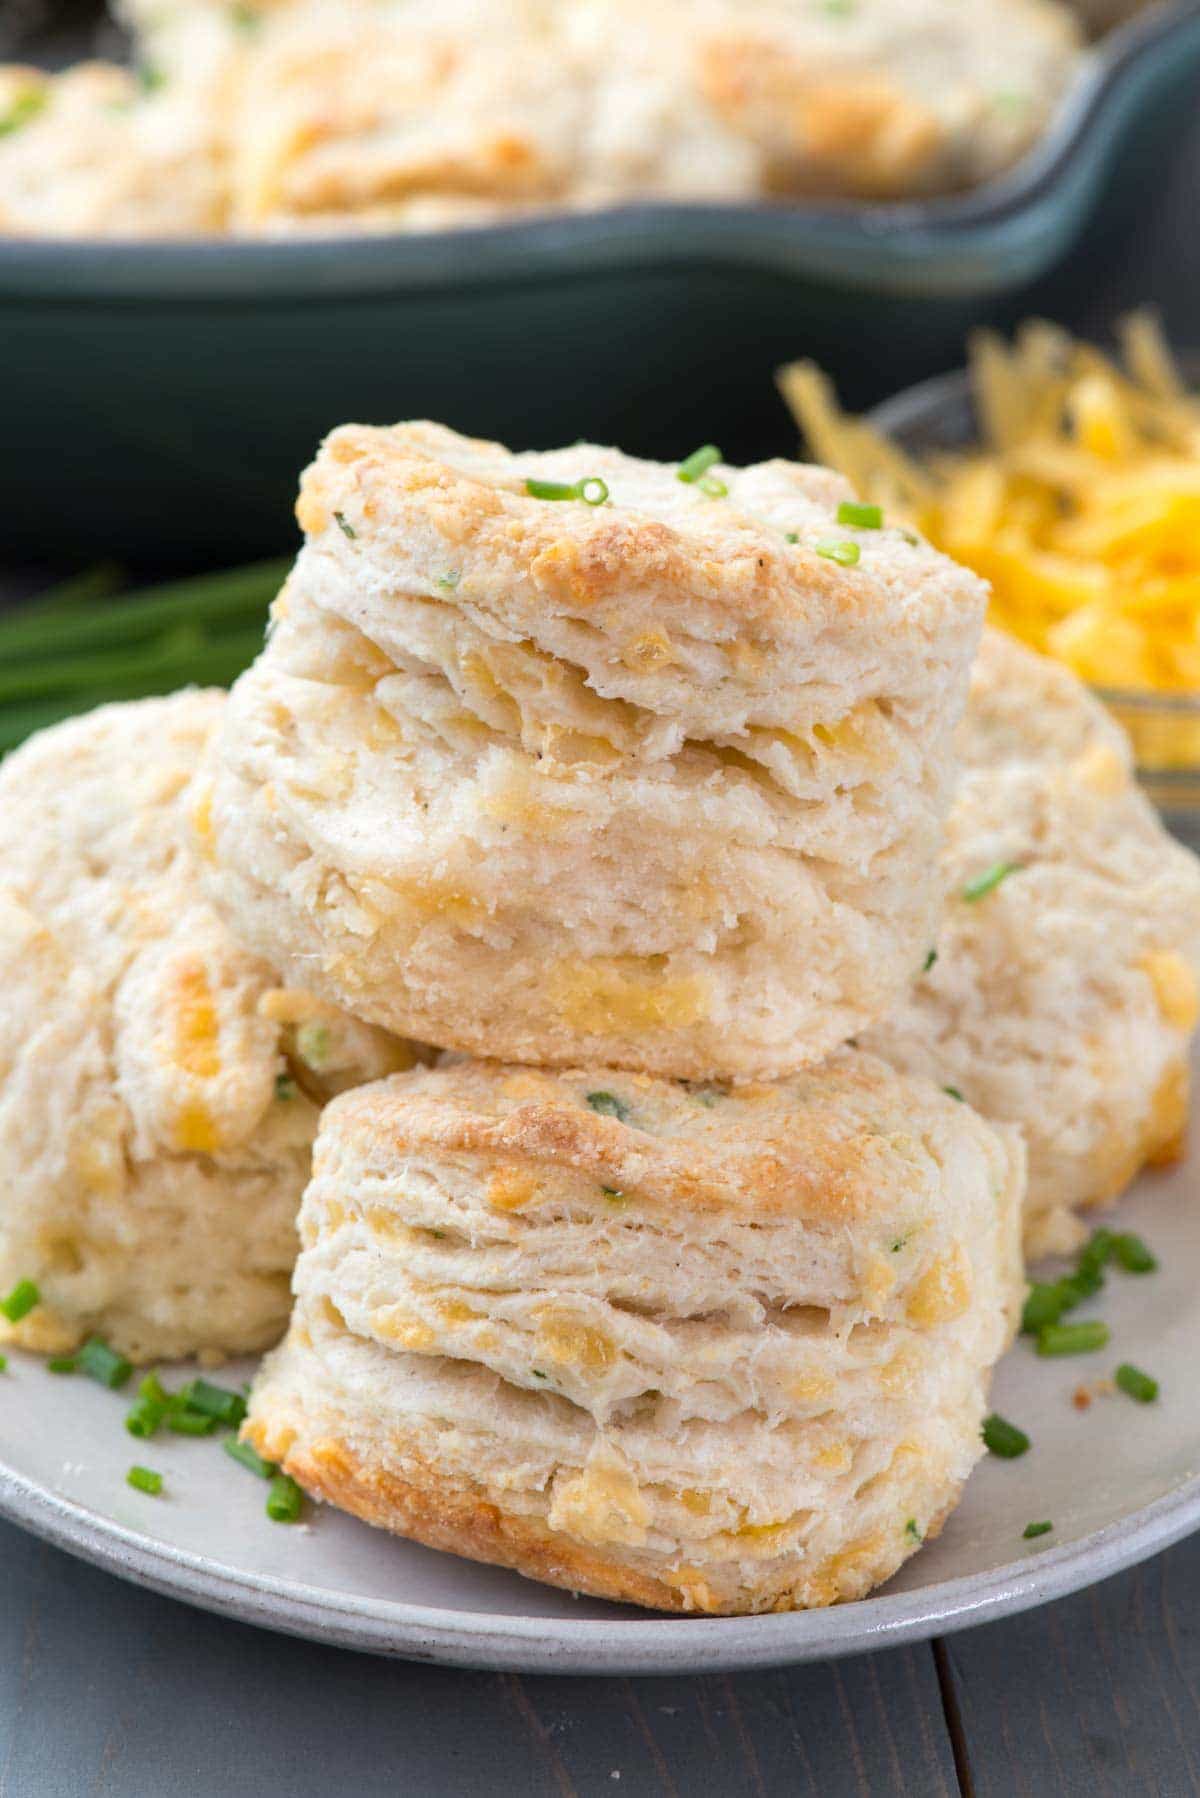 Cheddar Chive Biscuits - this easy buttermilk biscuit recipe is FULL of cheddar cheese and chives! Look at all those layers!